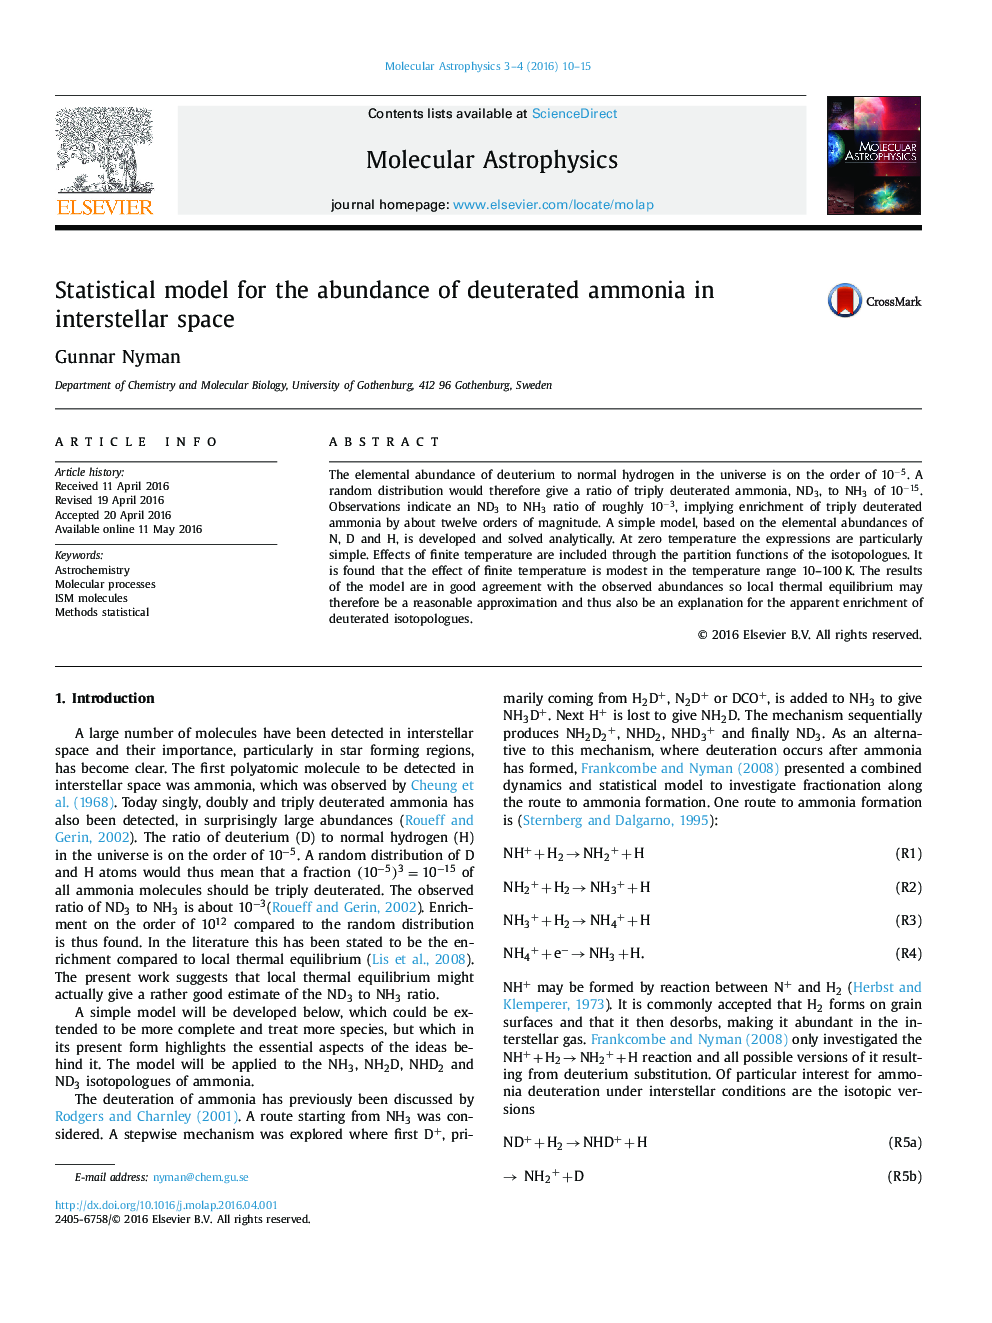 Statistical model for the abundance of deuterated ammonia in interstellar space